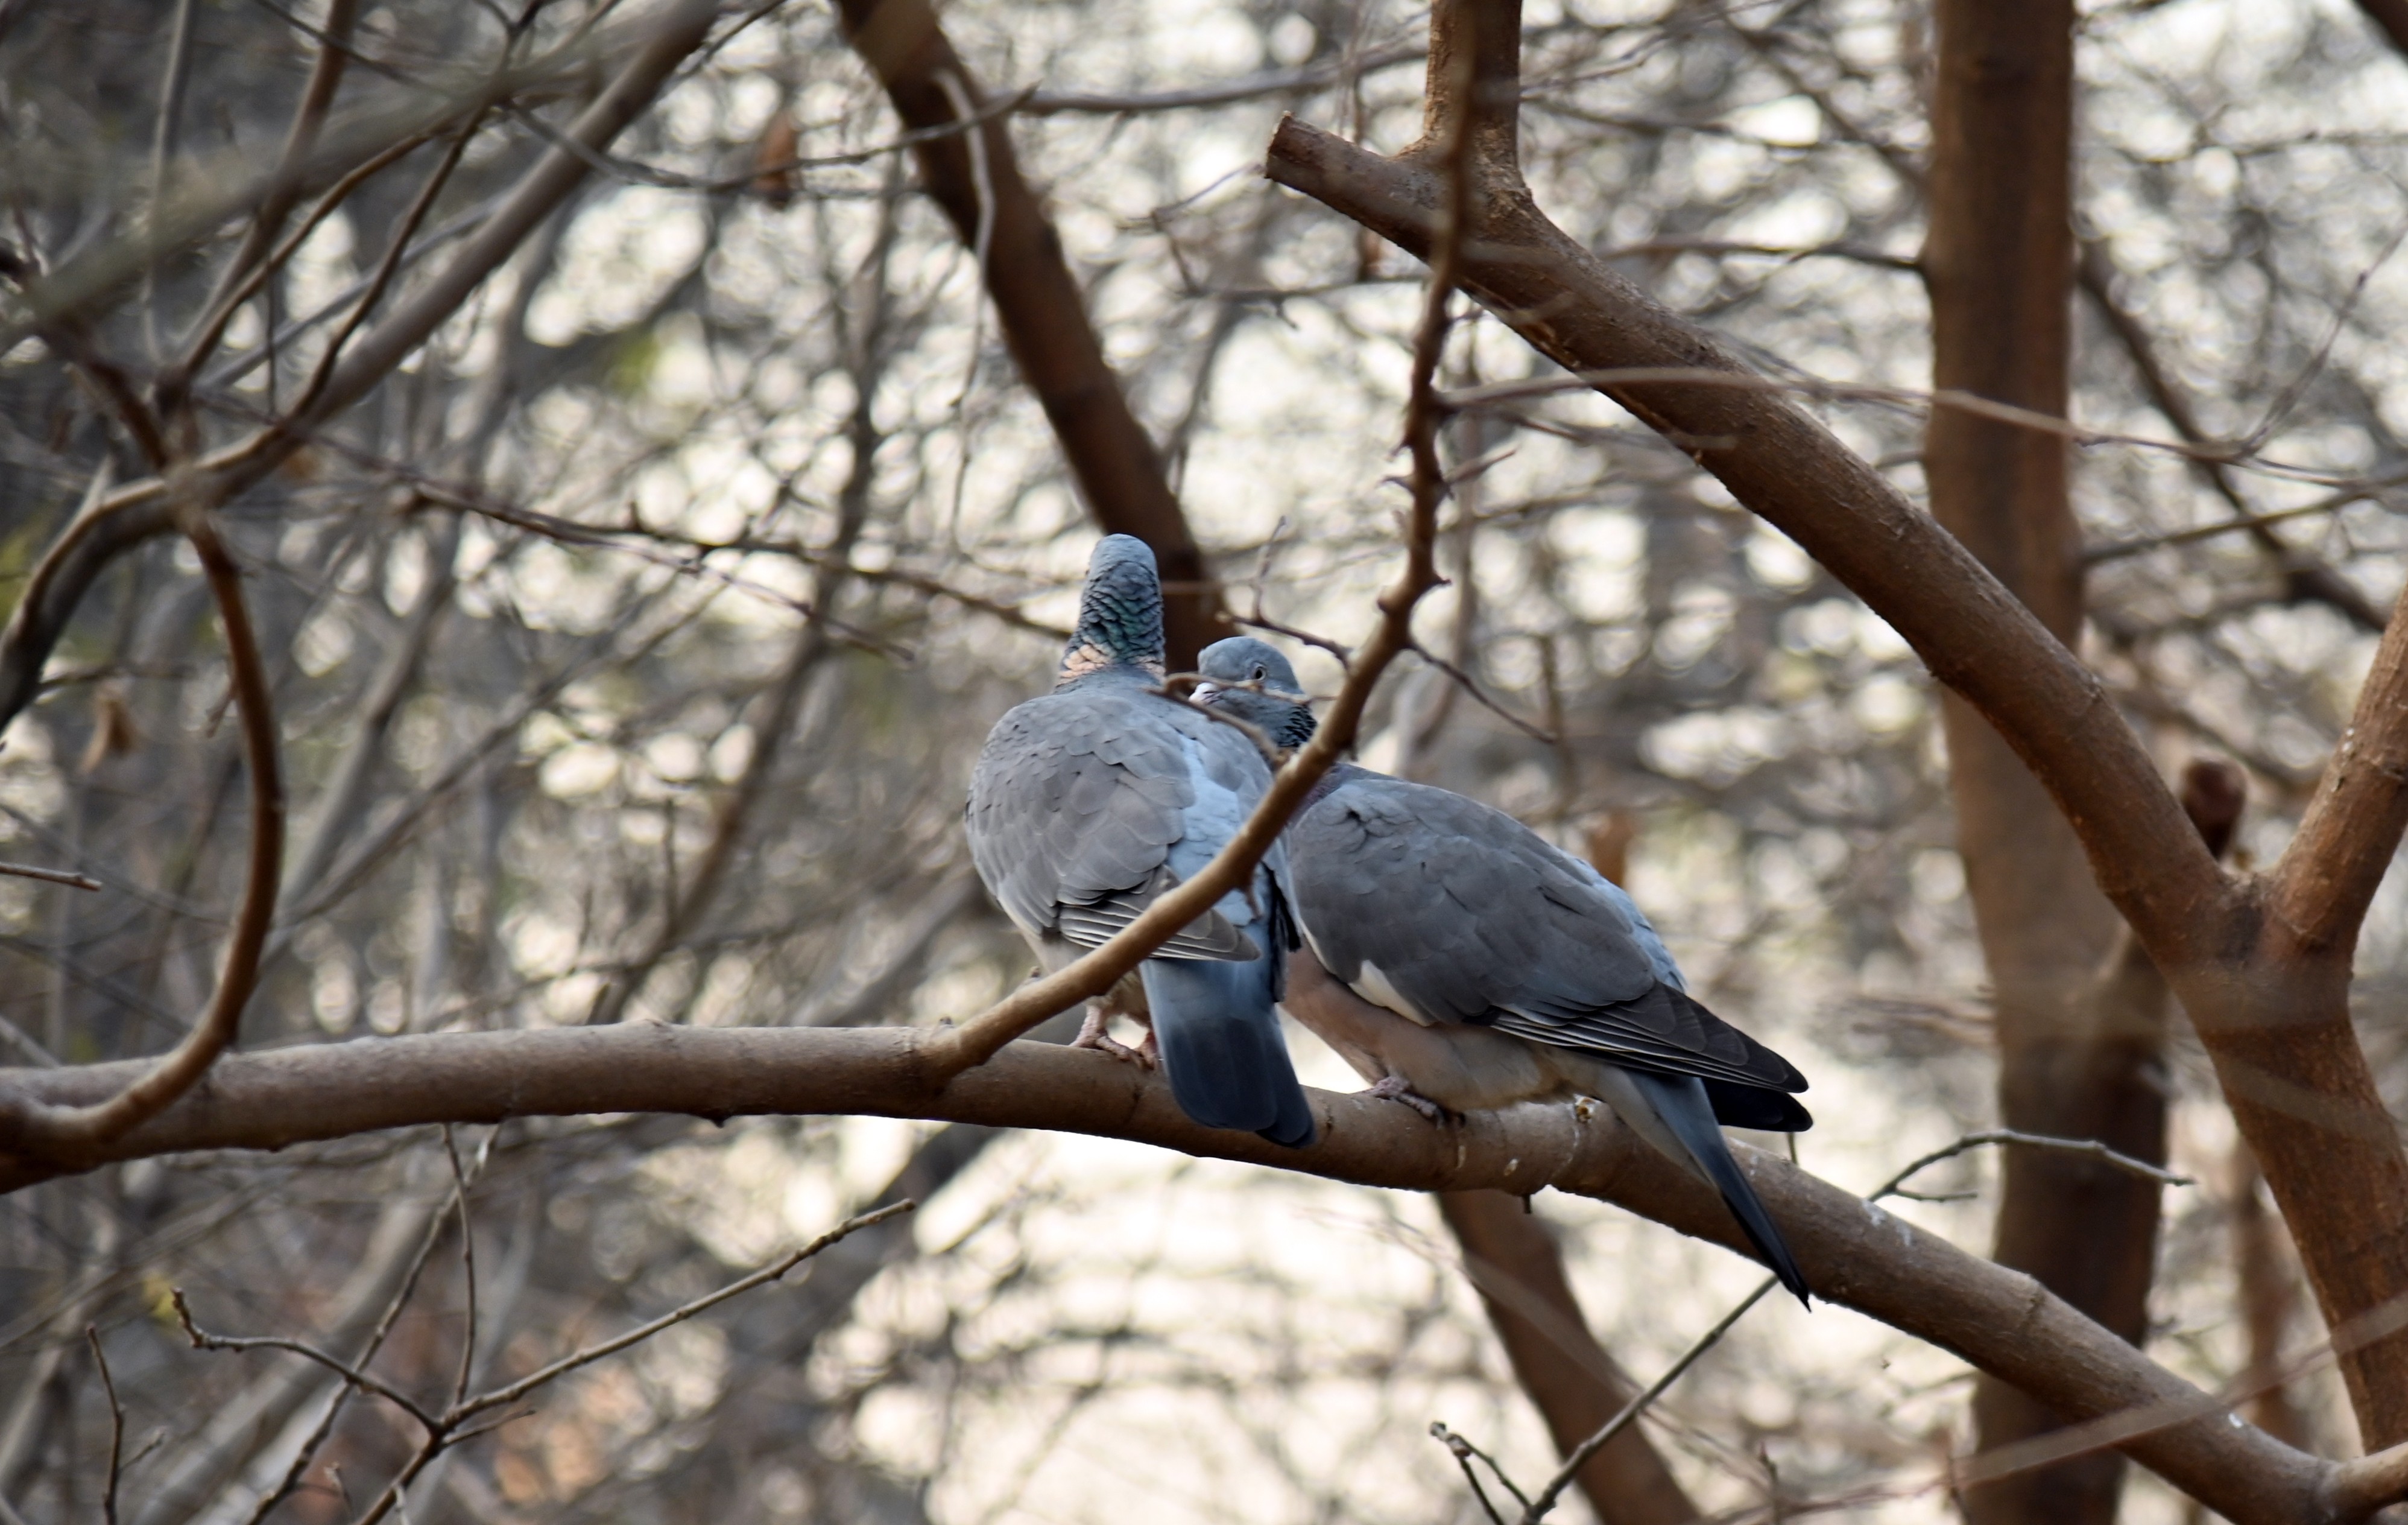 A pair of pigeon sitting on a tree